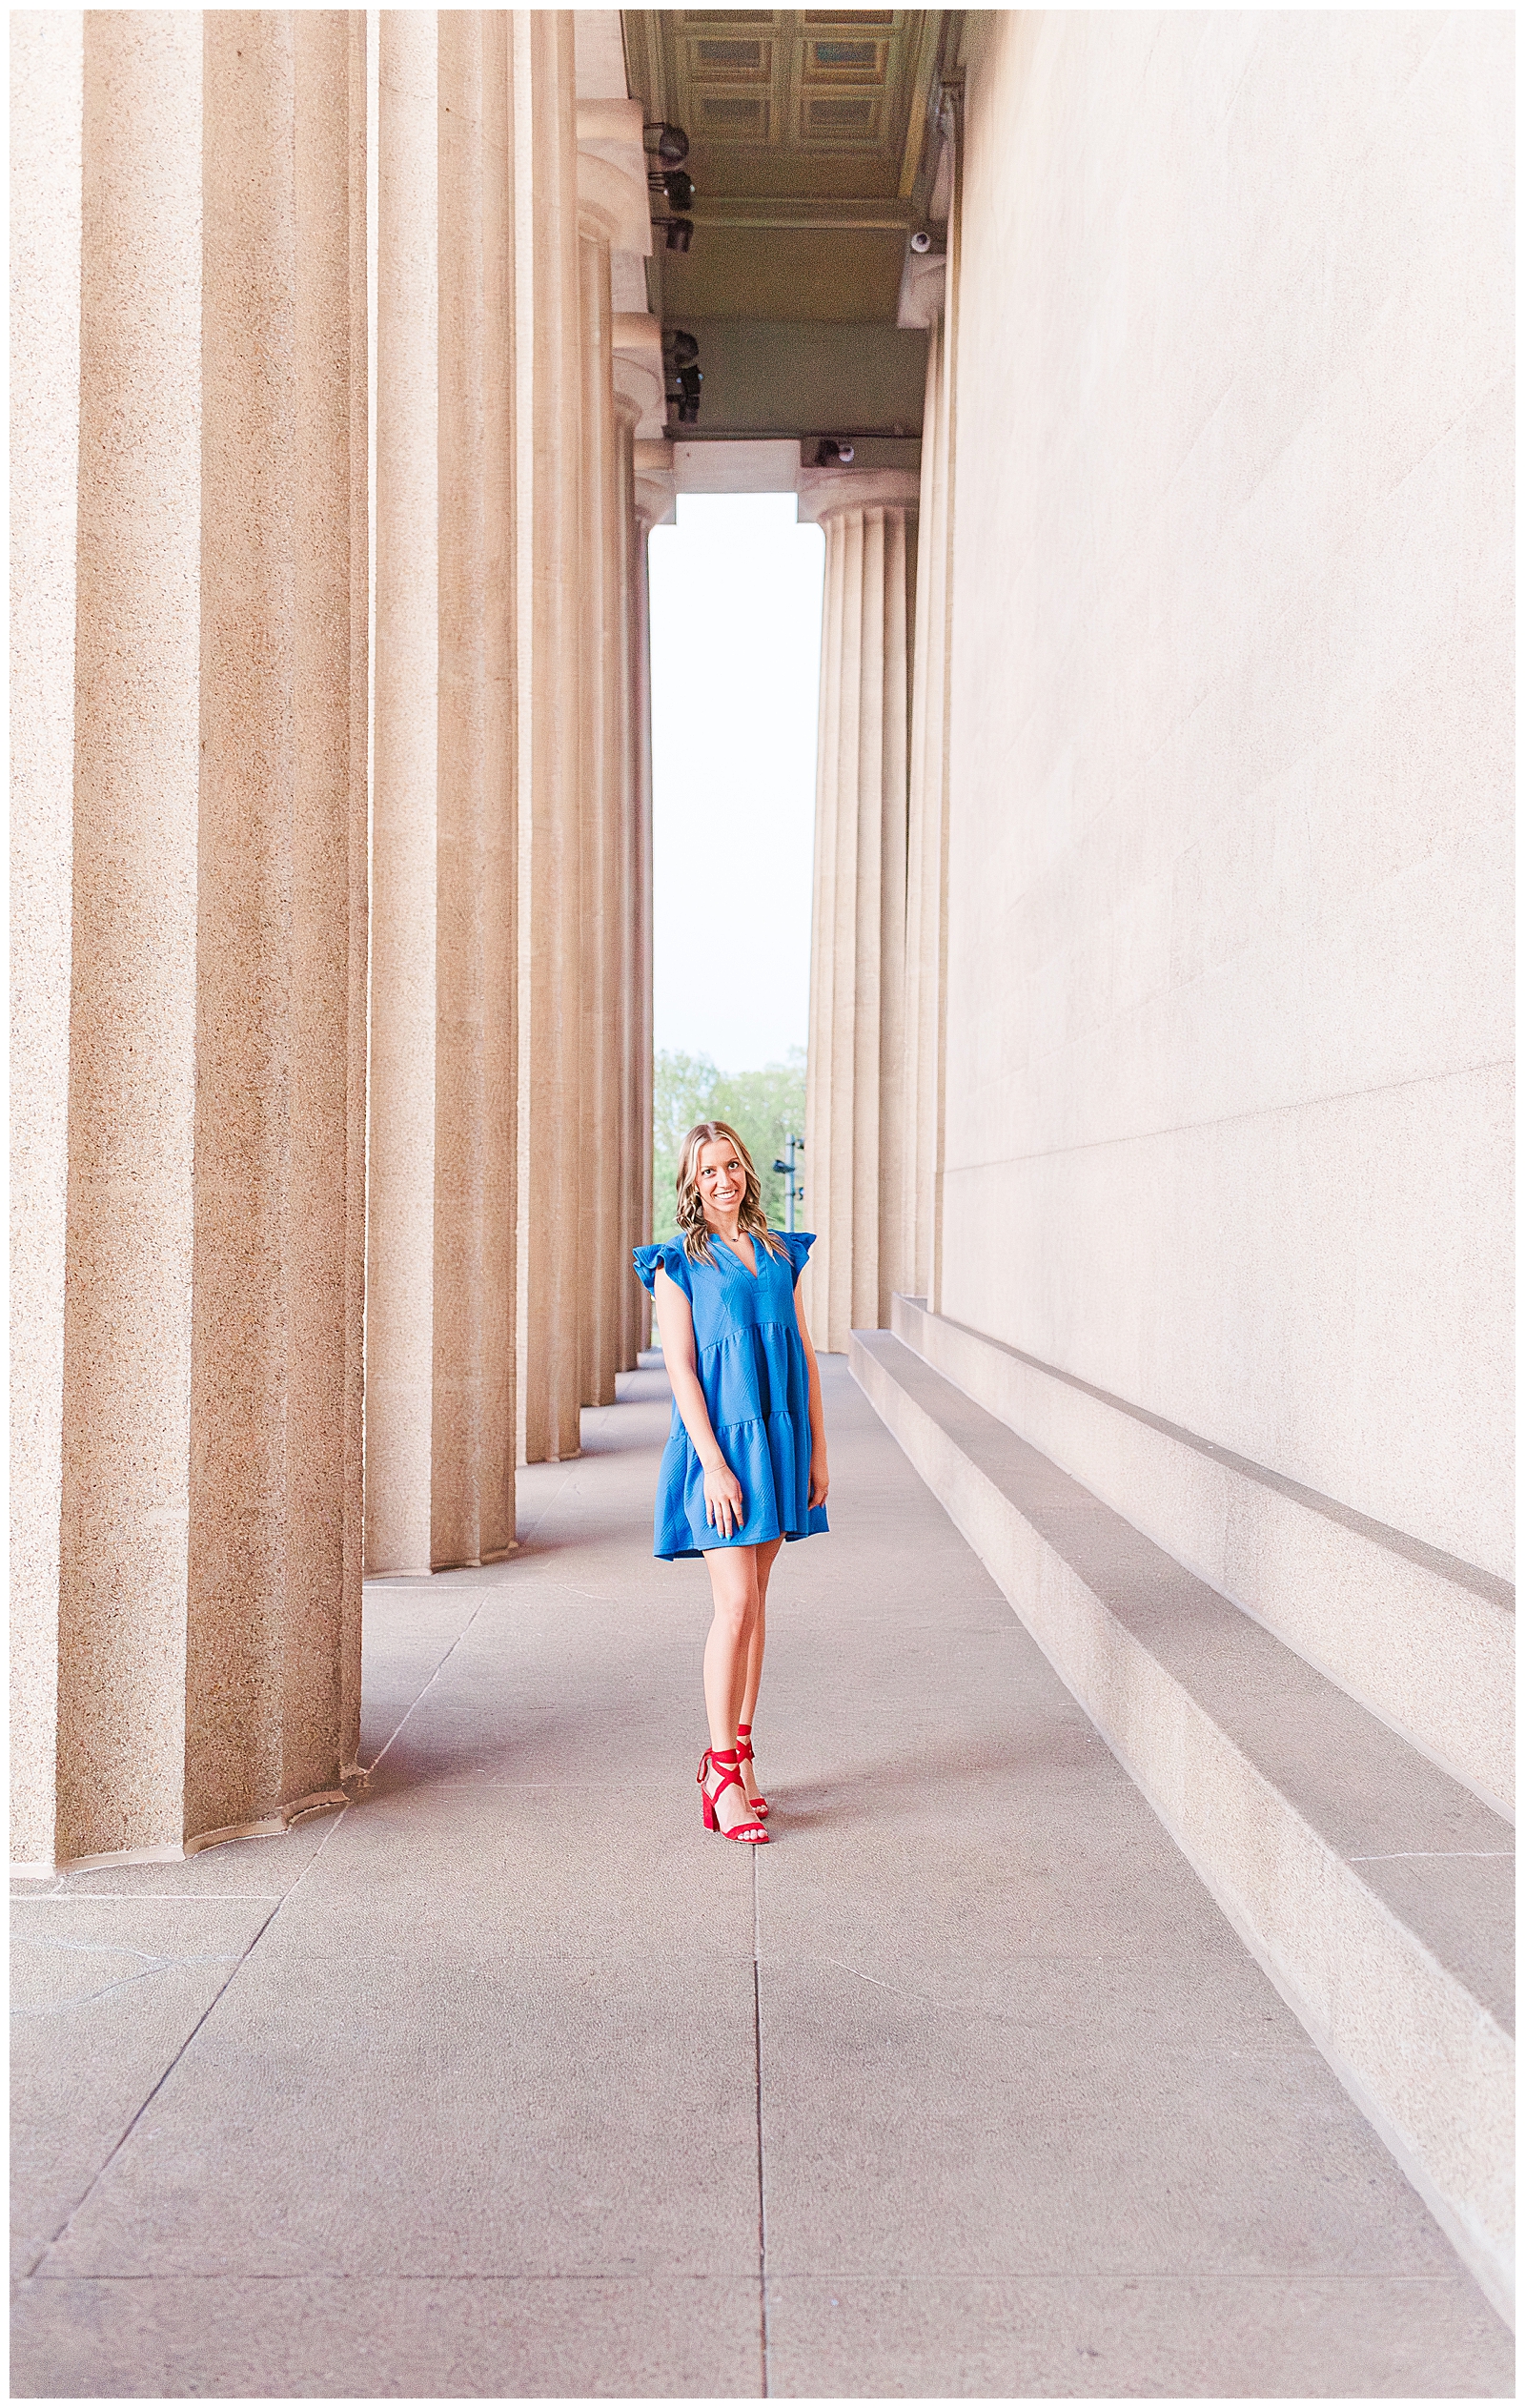 Senior girl in a blue dress and red heels, in front of columns at Centennial Park, Nashville, TN